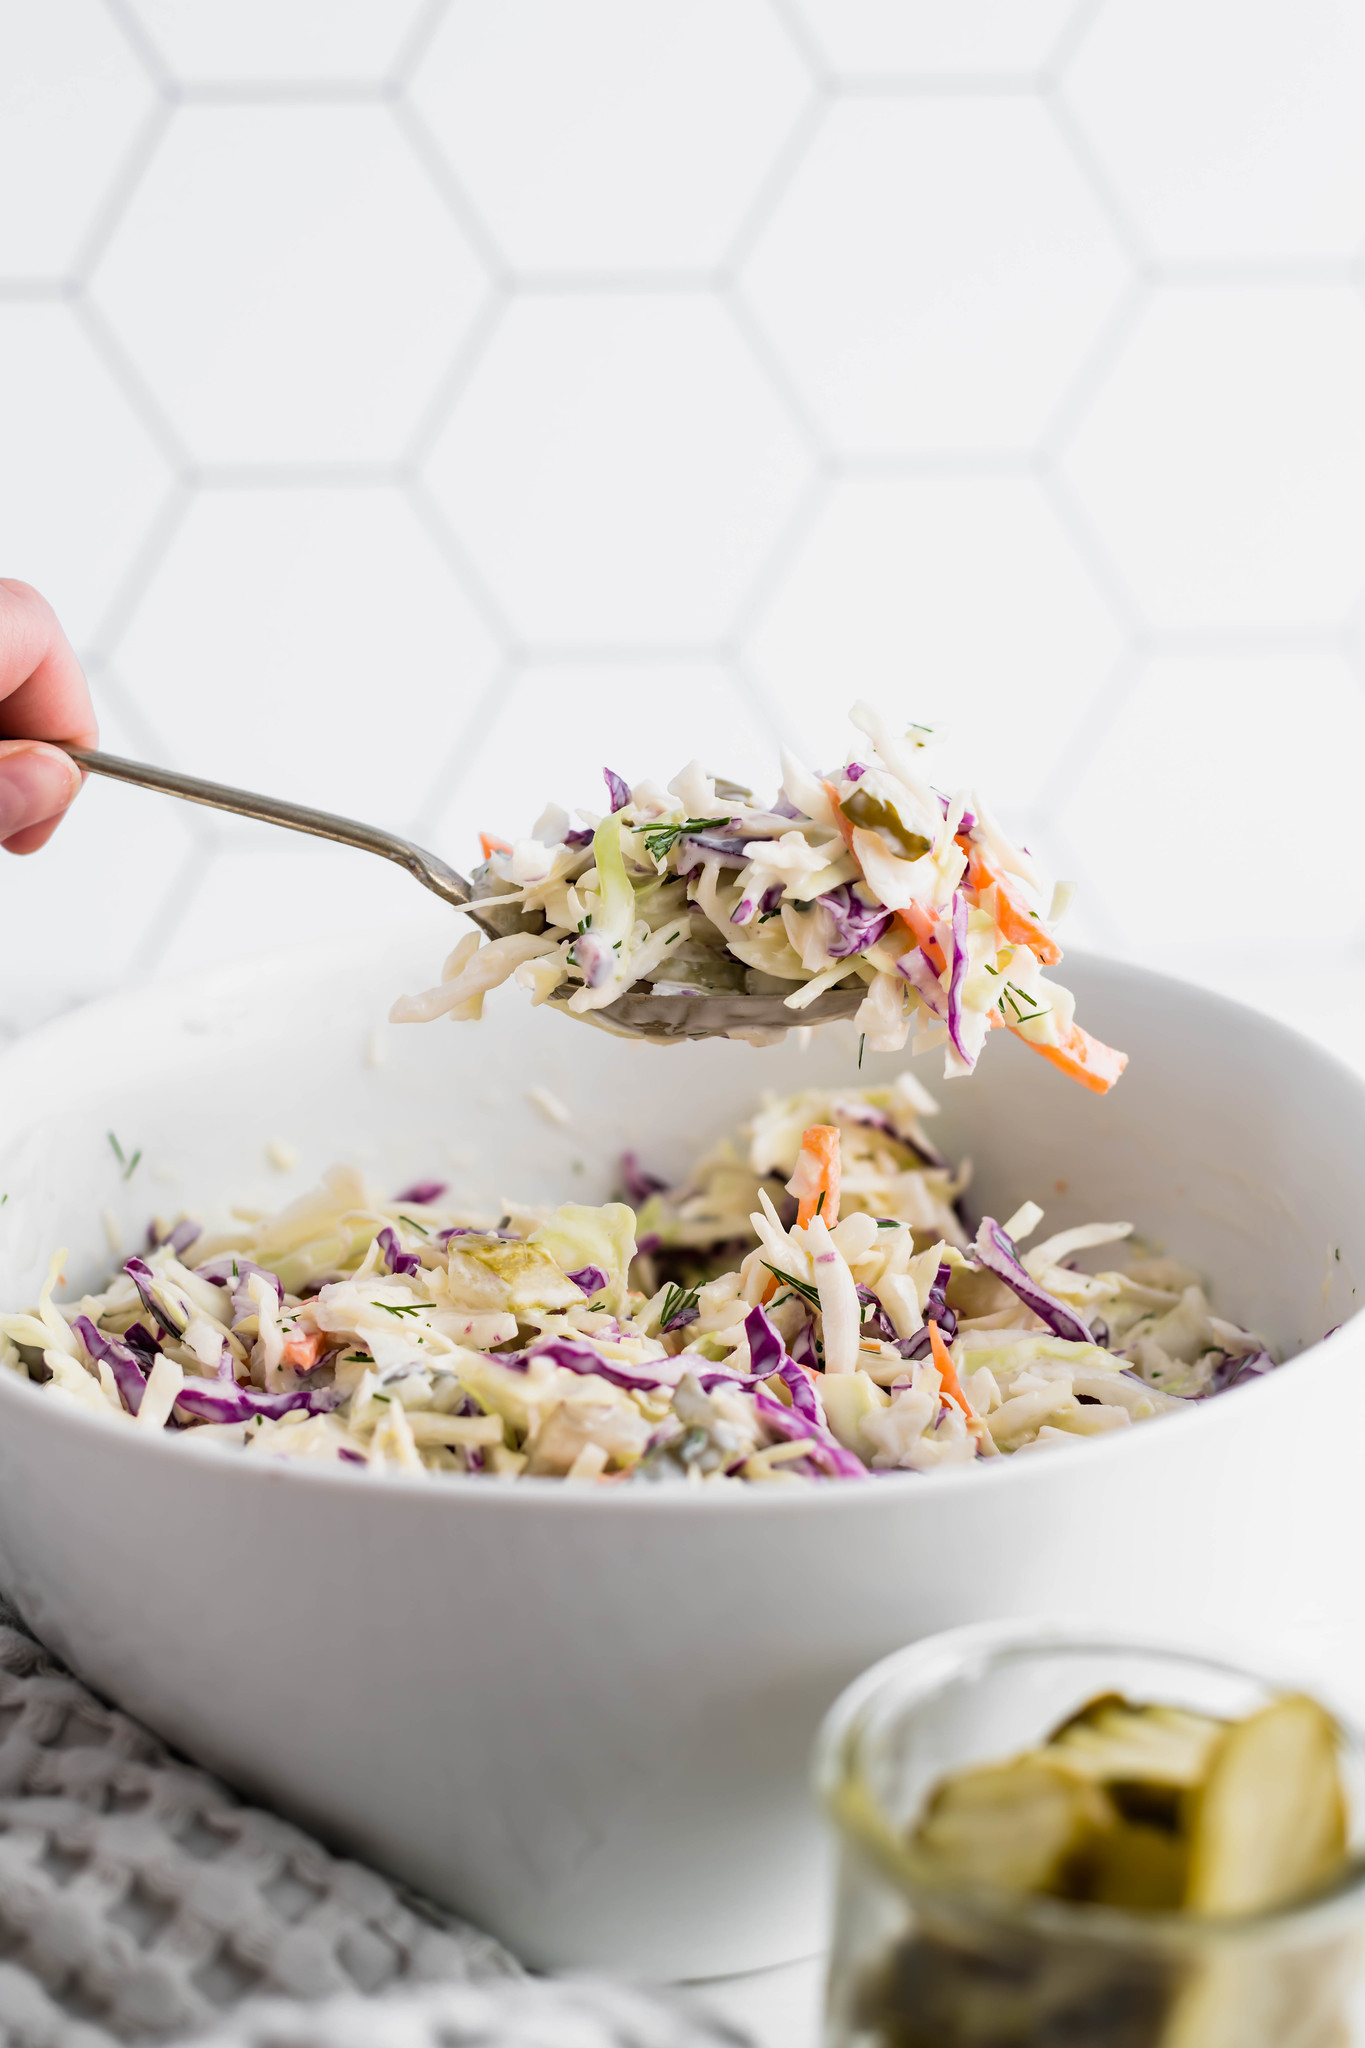 Change up your classic coleslaw with this Dill Pickle Coleslaw. Creamy dressing spiked with pickle juice, chopped pickles and fresh dill brings all the pickle flavor.